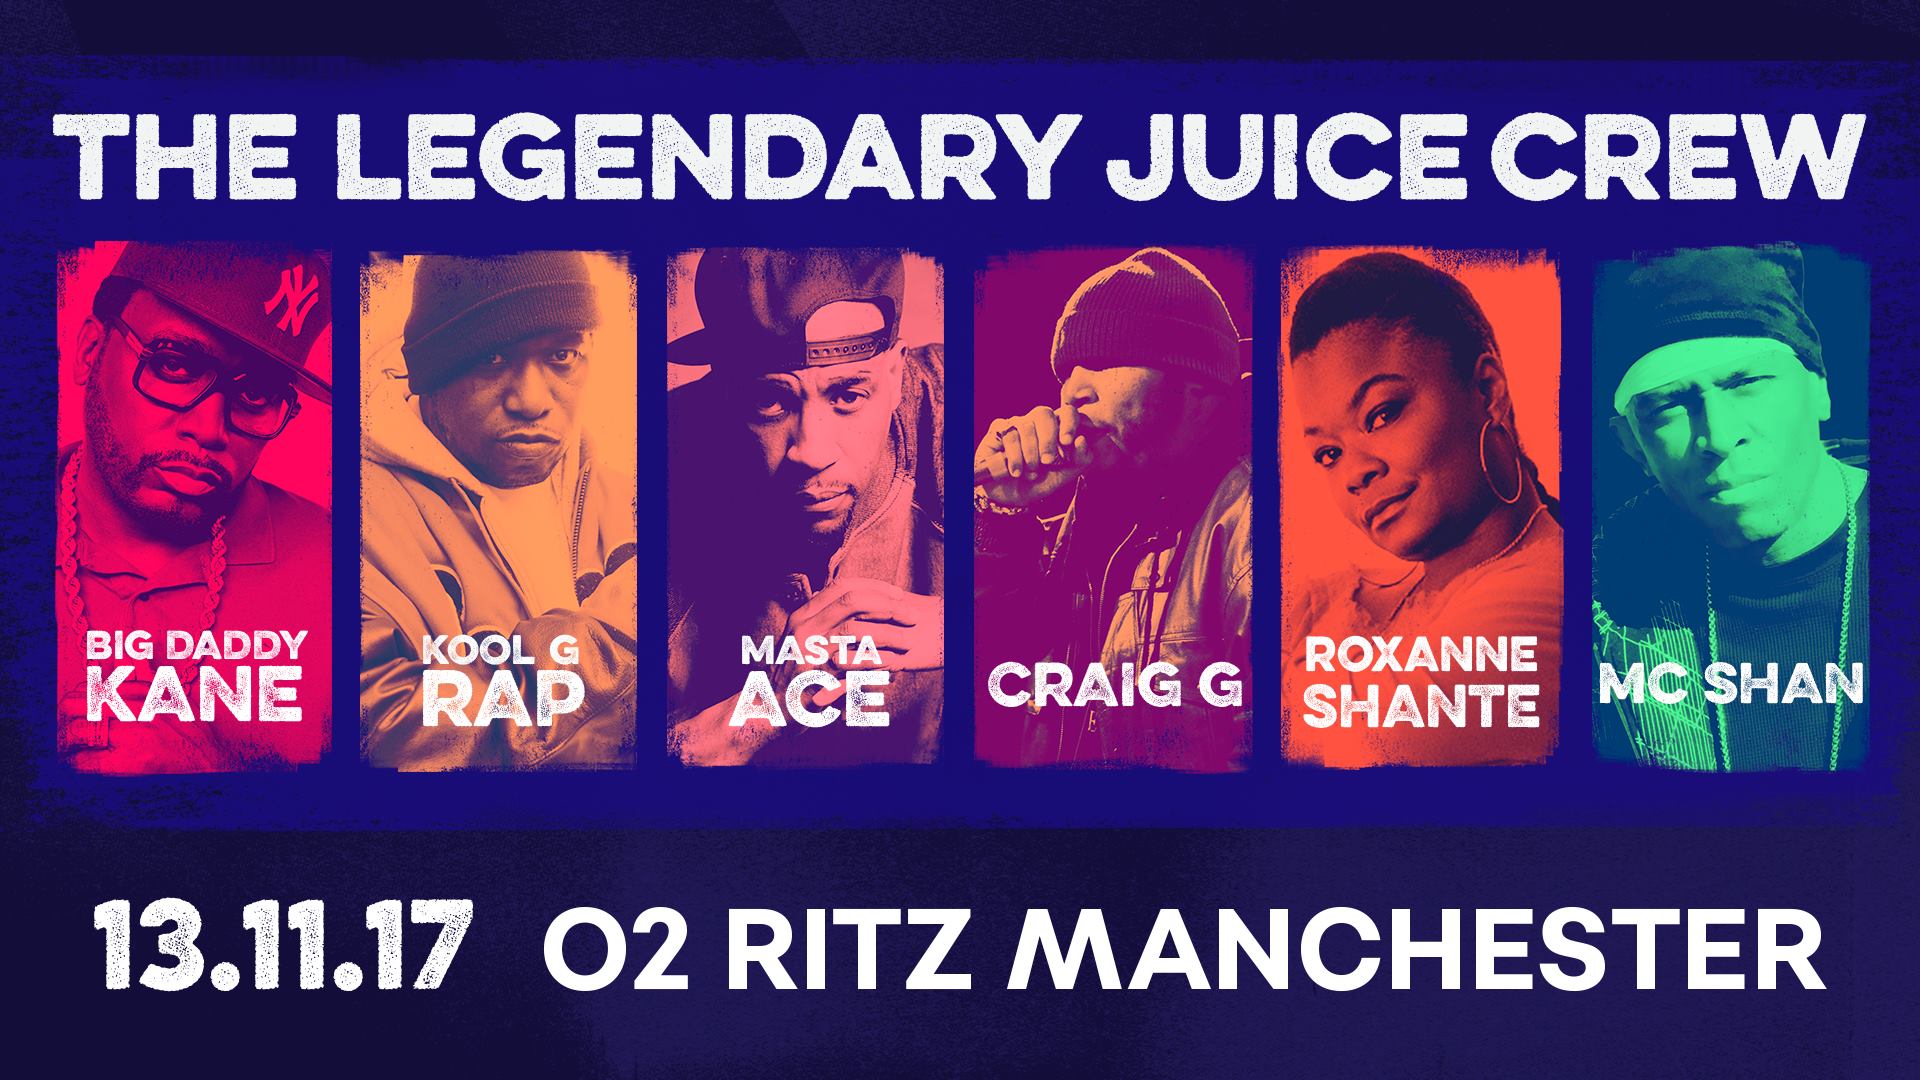  Juice Crew return to UK after 20 years!